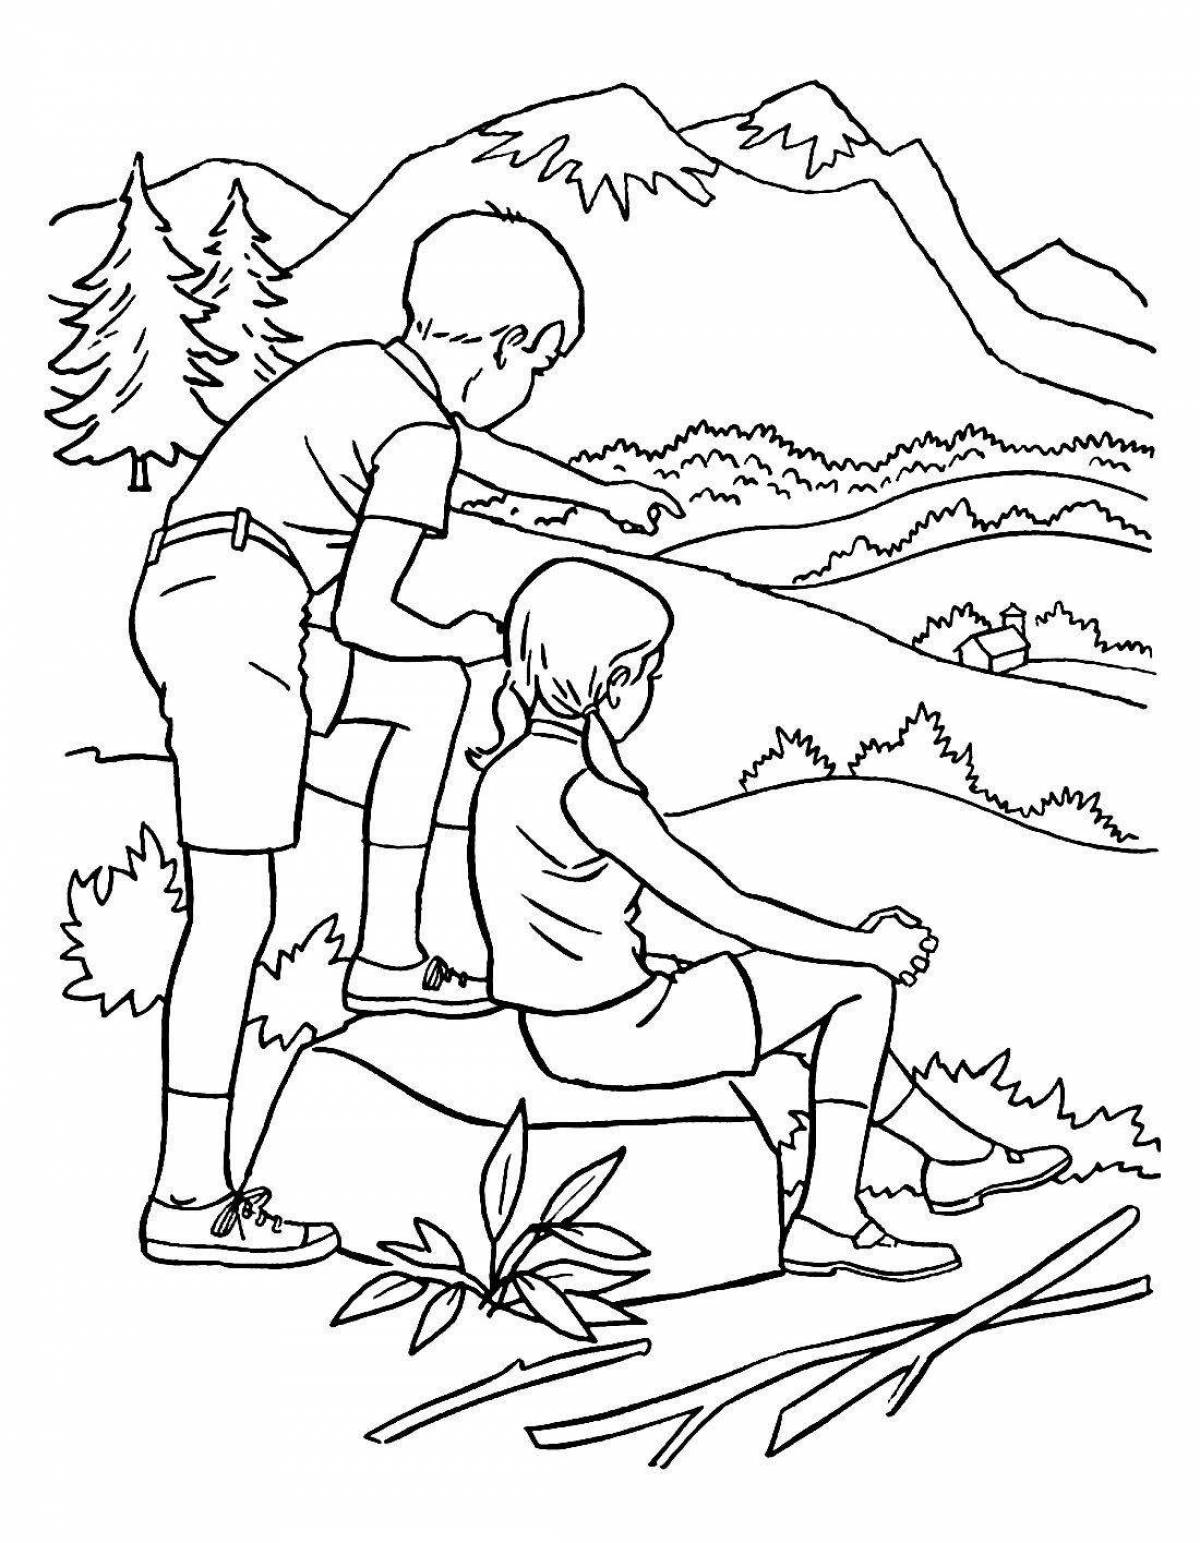 Charming girl in the forest coloring book